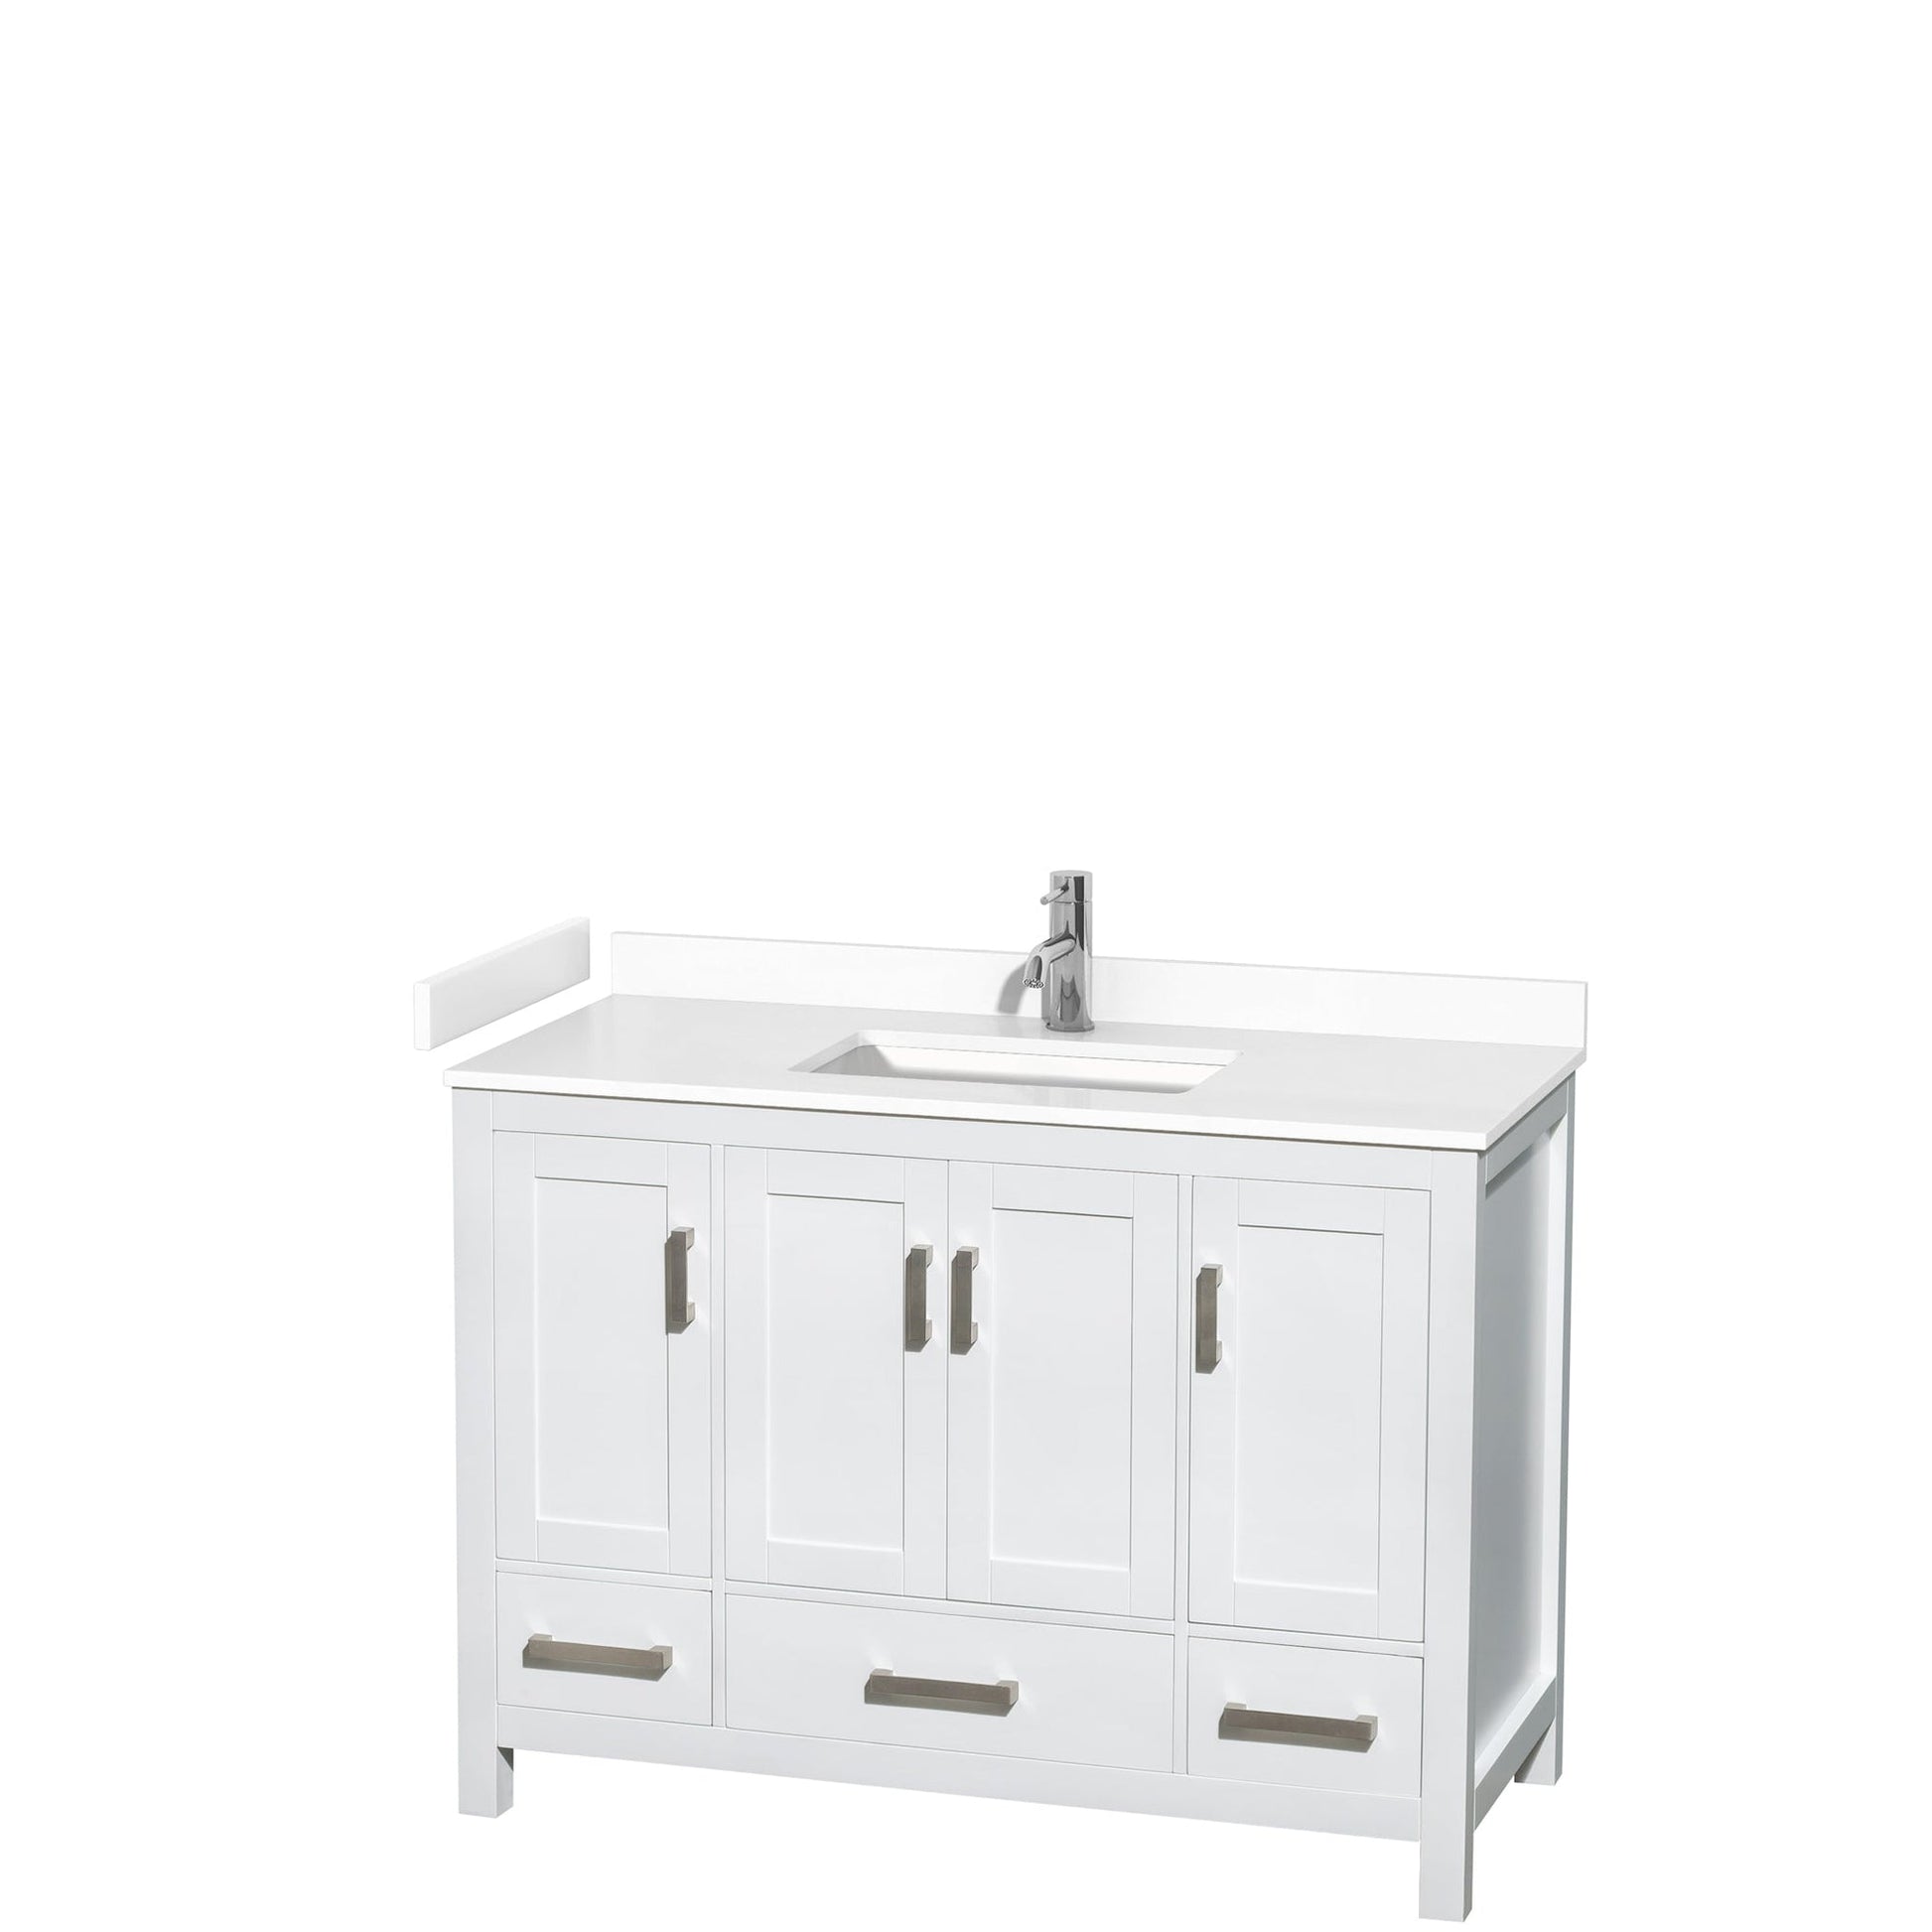 Wyndham Collection Sheffield 48" Single Bathroom Vanity in White, White Cultured Marble Countertop, Undermount Square Sink, No Mirror